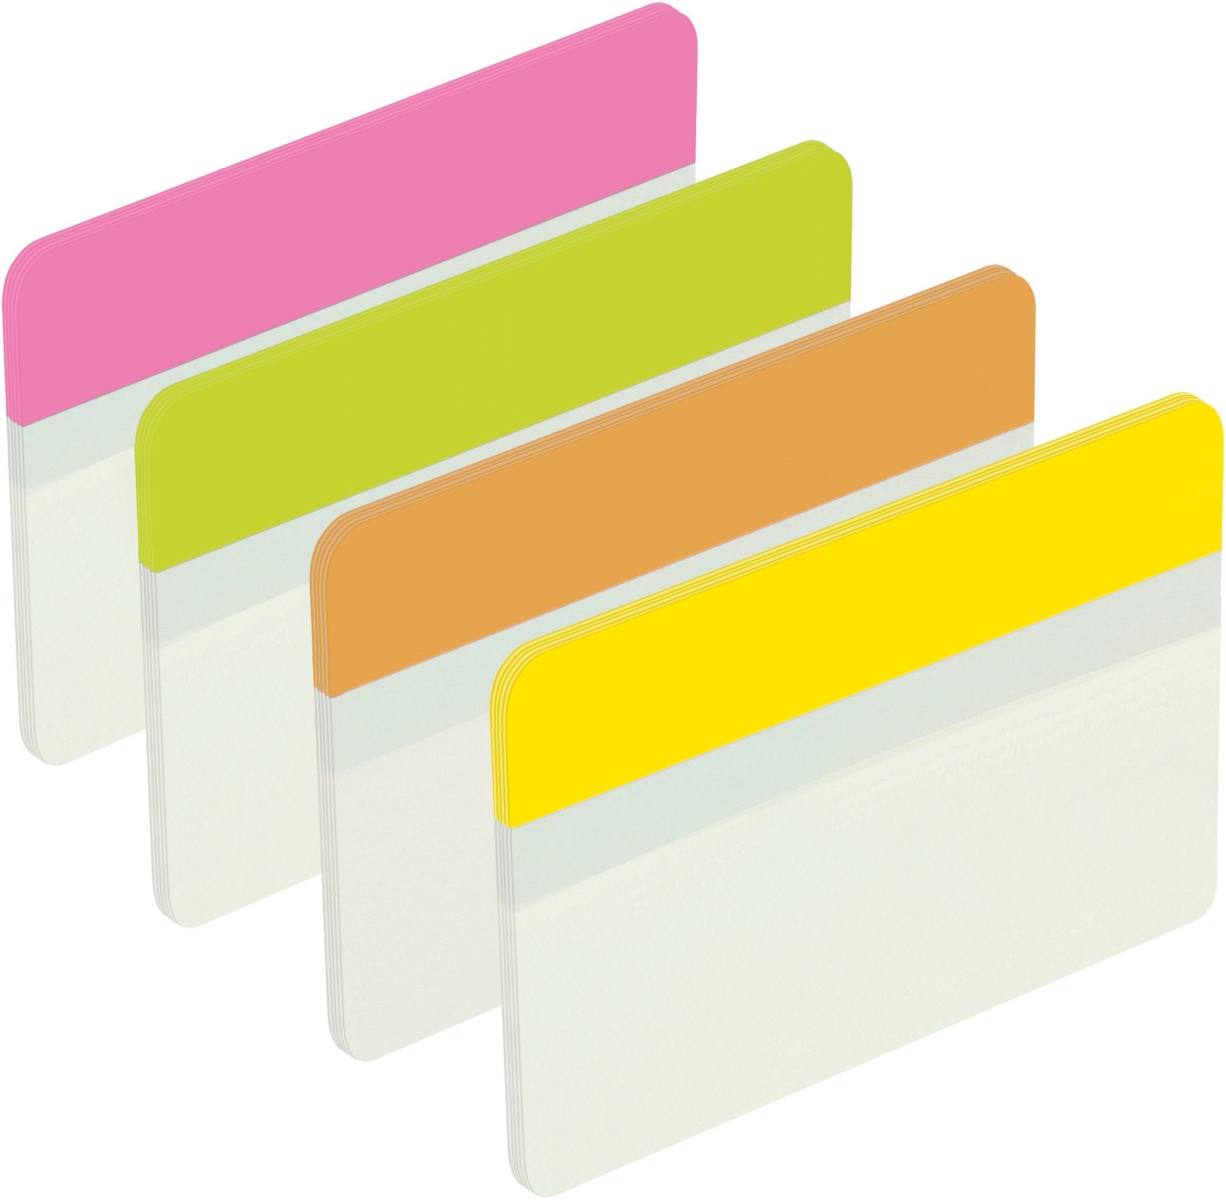 3M Post-it Index Strong 686-PLOY, 50,8 mm x 38 mm, giallo, verde, arancione, rosa, 4 x 6 strisce adesive